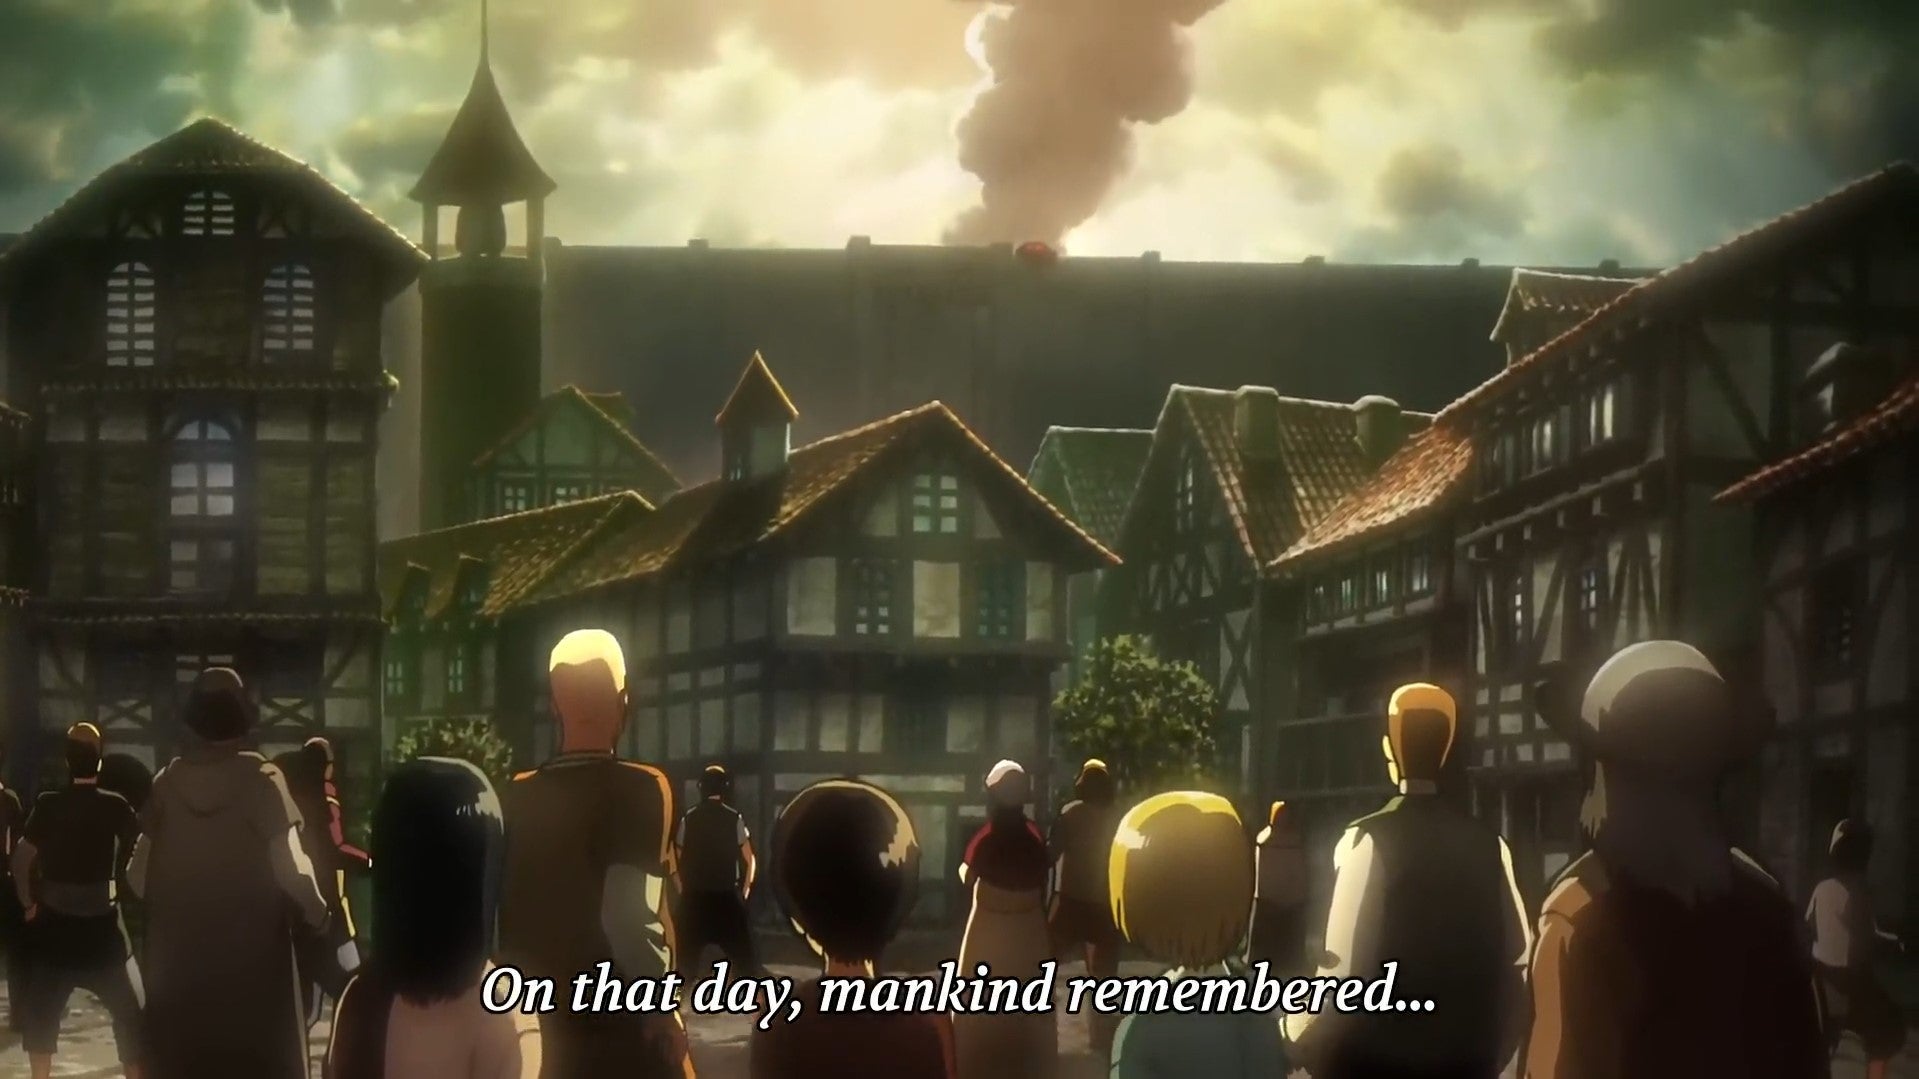 Attack On Titan Pop Culture Influence Makind Remembered